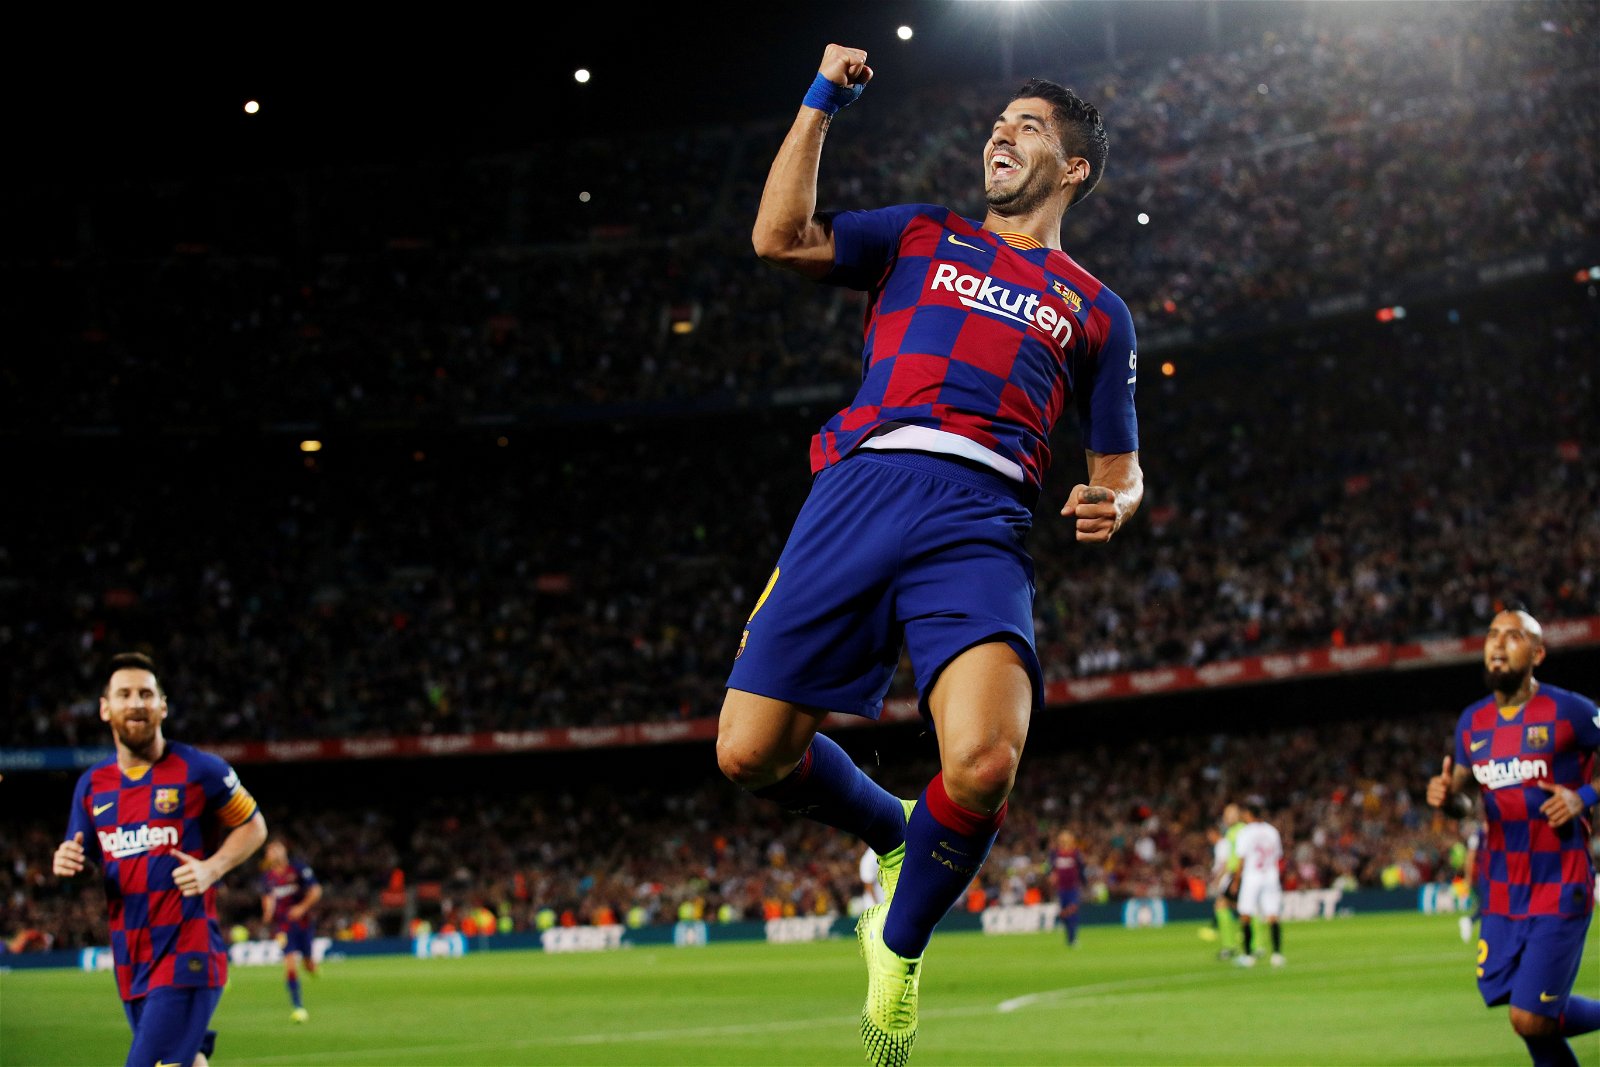 Five things we learned from Barcelona clash with Sevilla